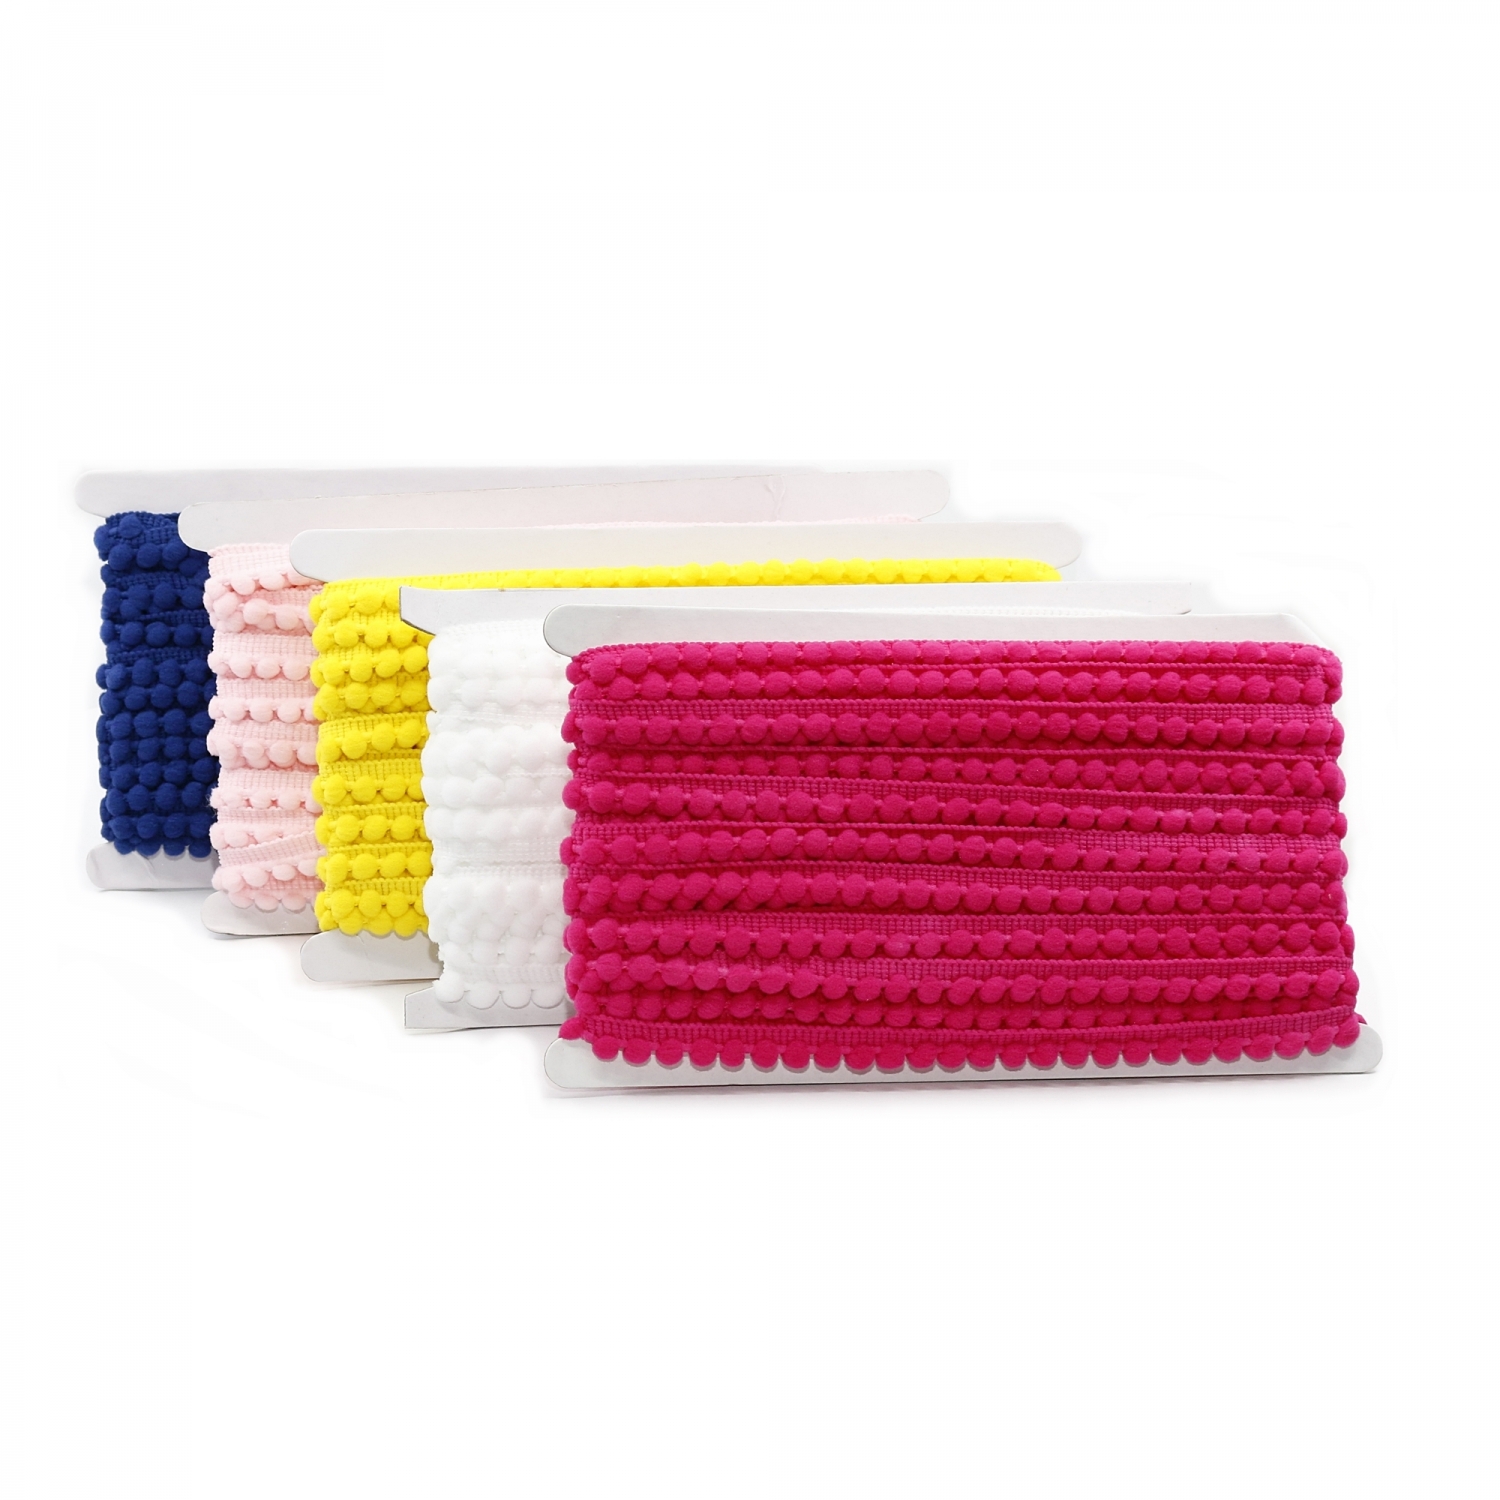 Decorative Tape with Small Pom Poms, 11 mm (13.5 meters/roll)Code: 510556